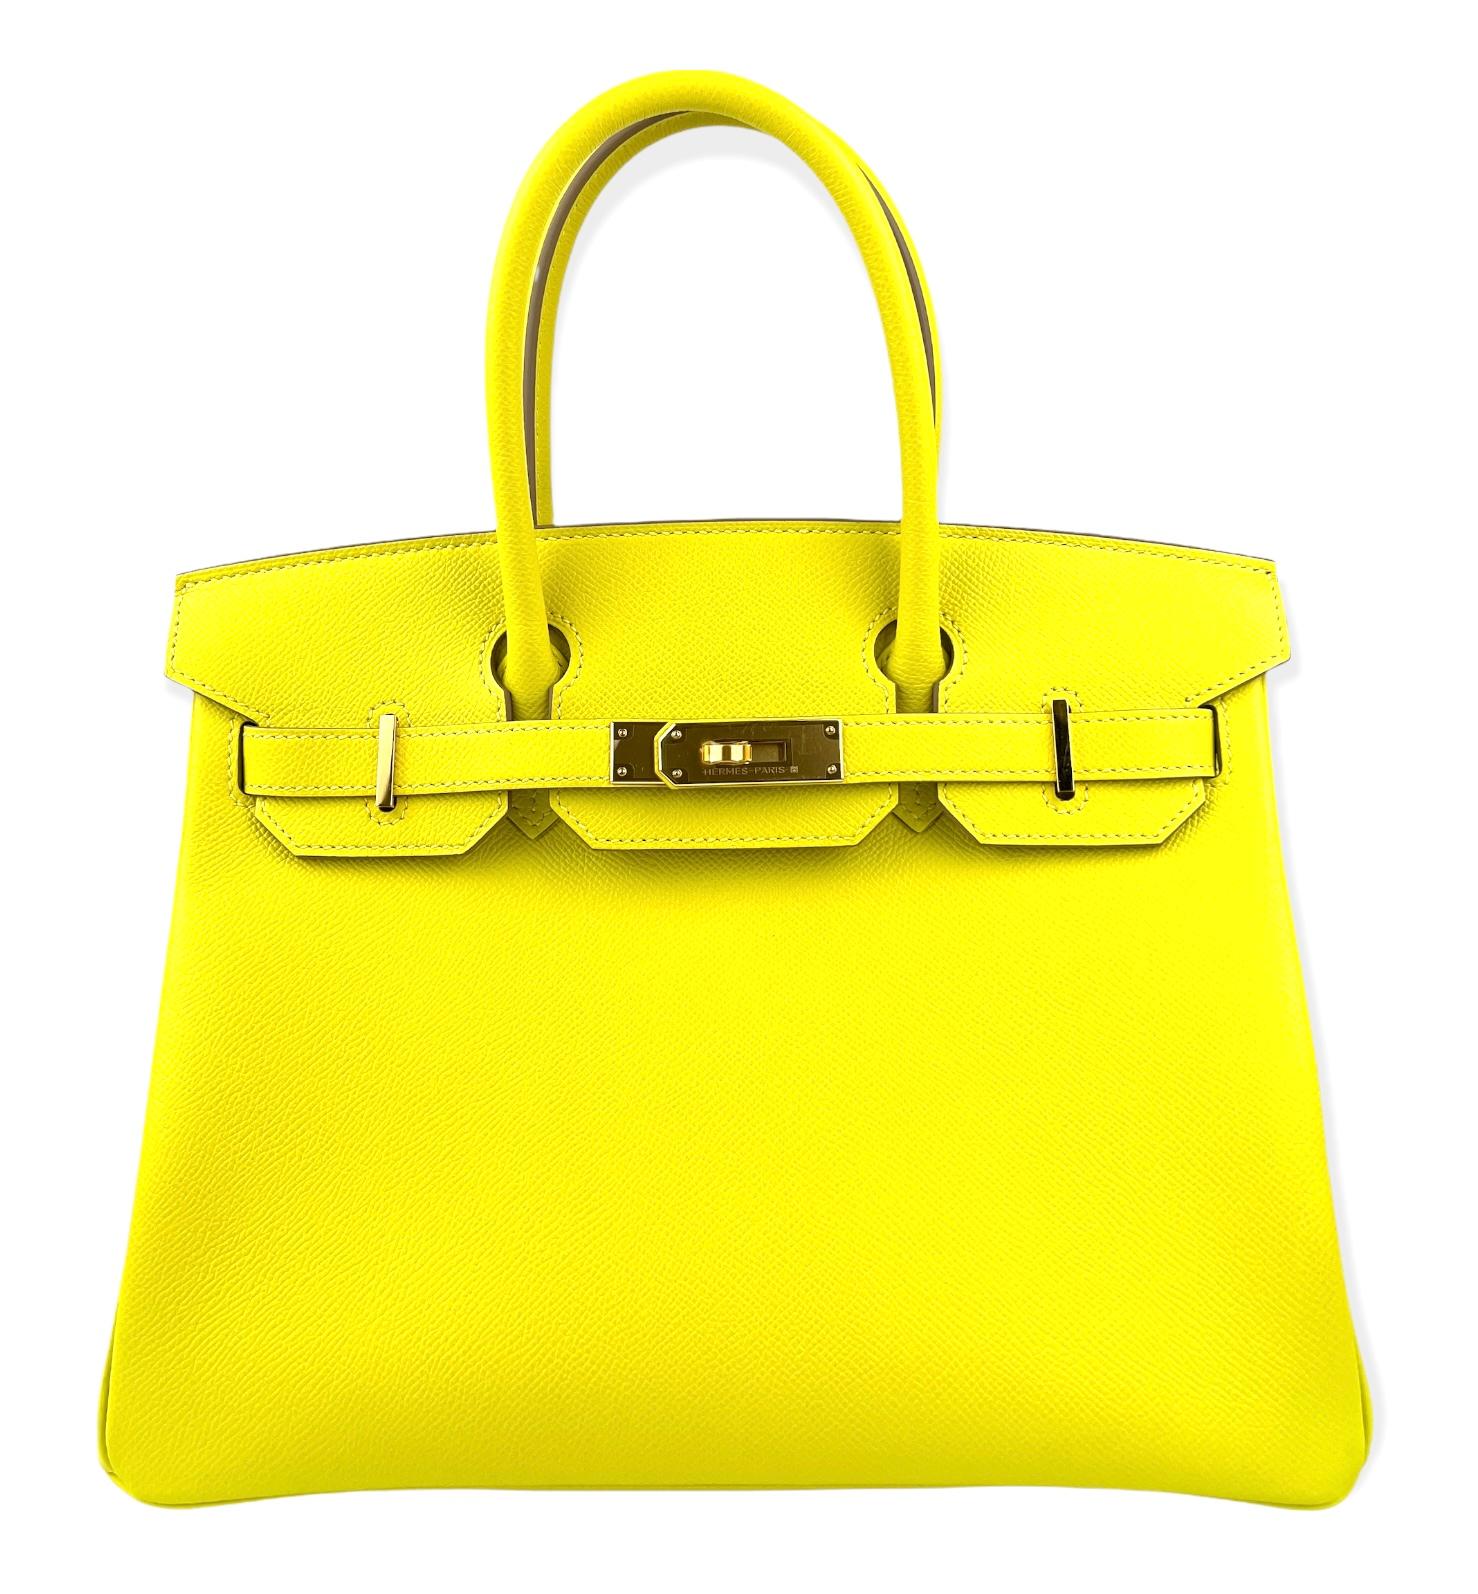 As New 2019 Stunning Hermes Birkin 30 Lime Yellow Epsom Leather Complimented by Gold Hardware. As New Condition with Plastic on all hardware and Feet. D Stamp 2019

Shop with Confidence from Lux Addicts. We are a very well known and highly respected